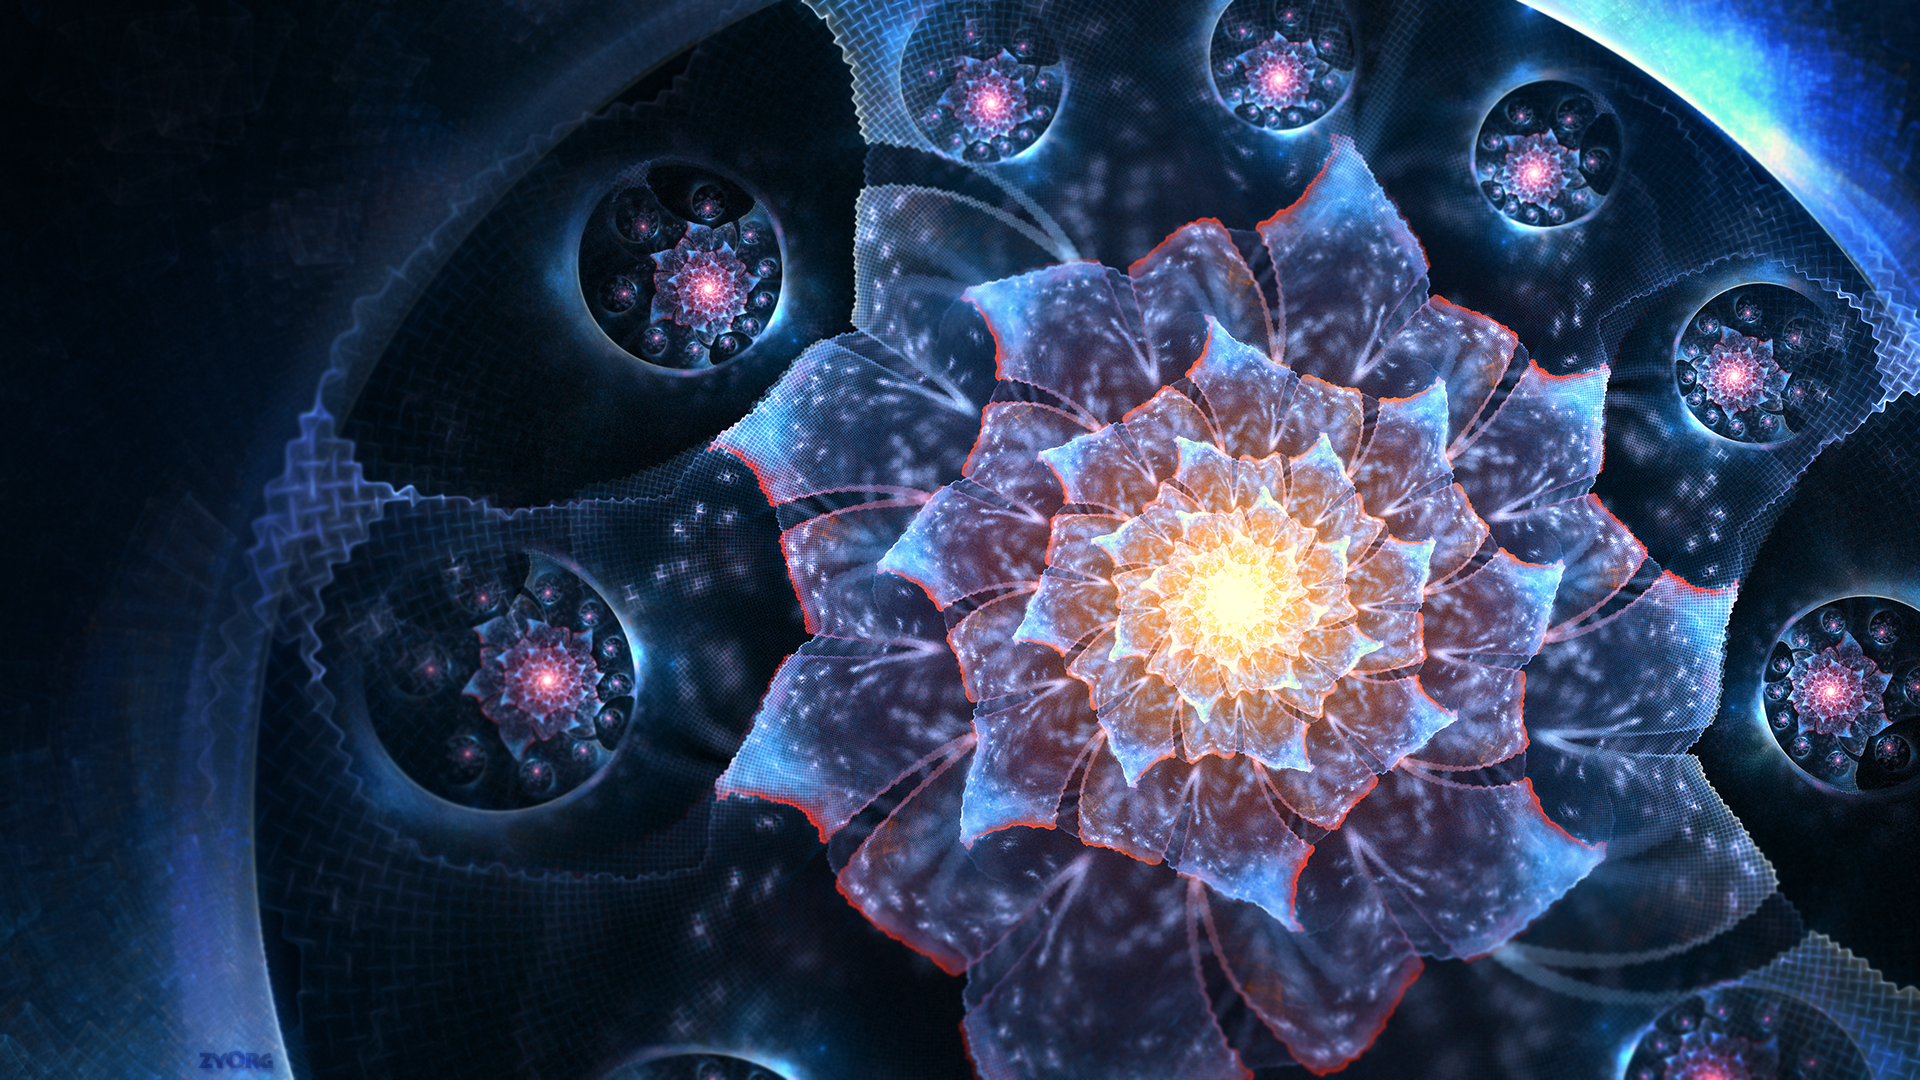 Abstract Fractal Flowers Fractal 1920x1080